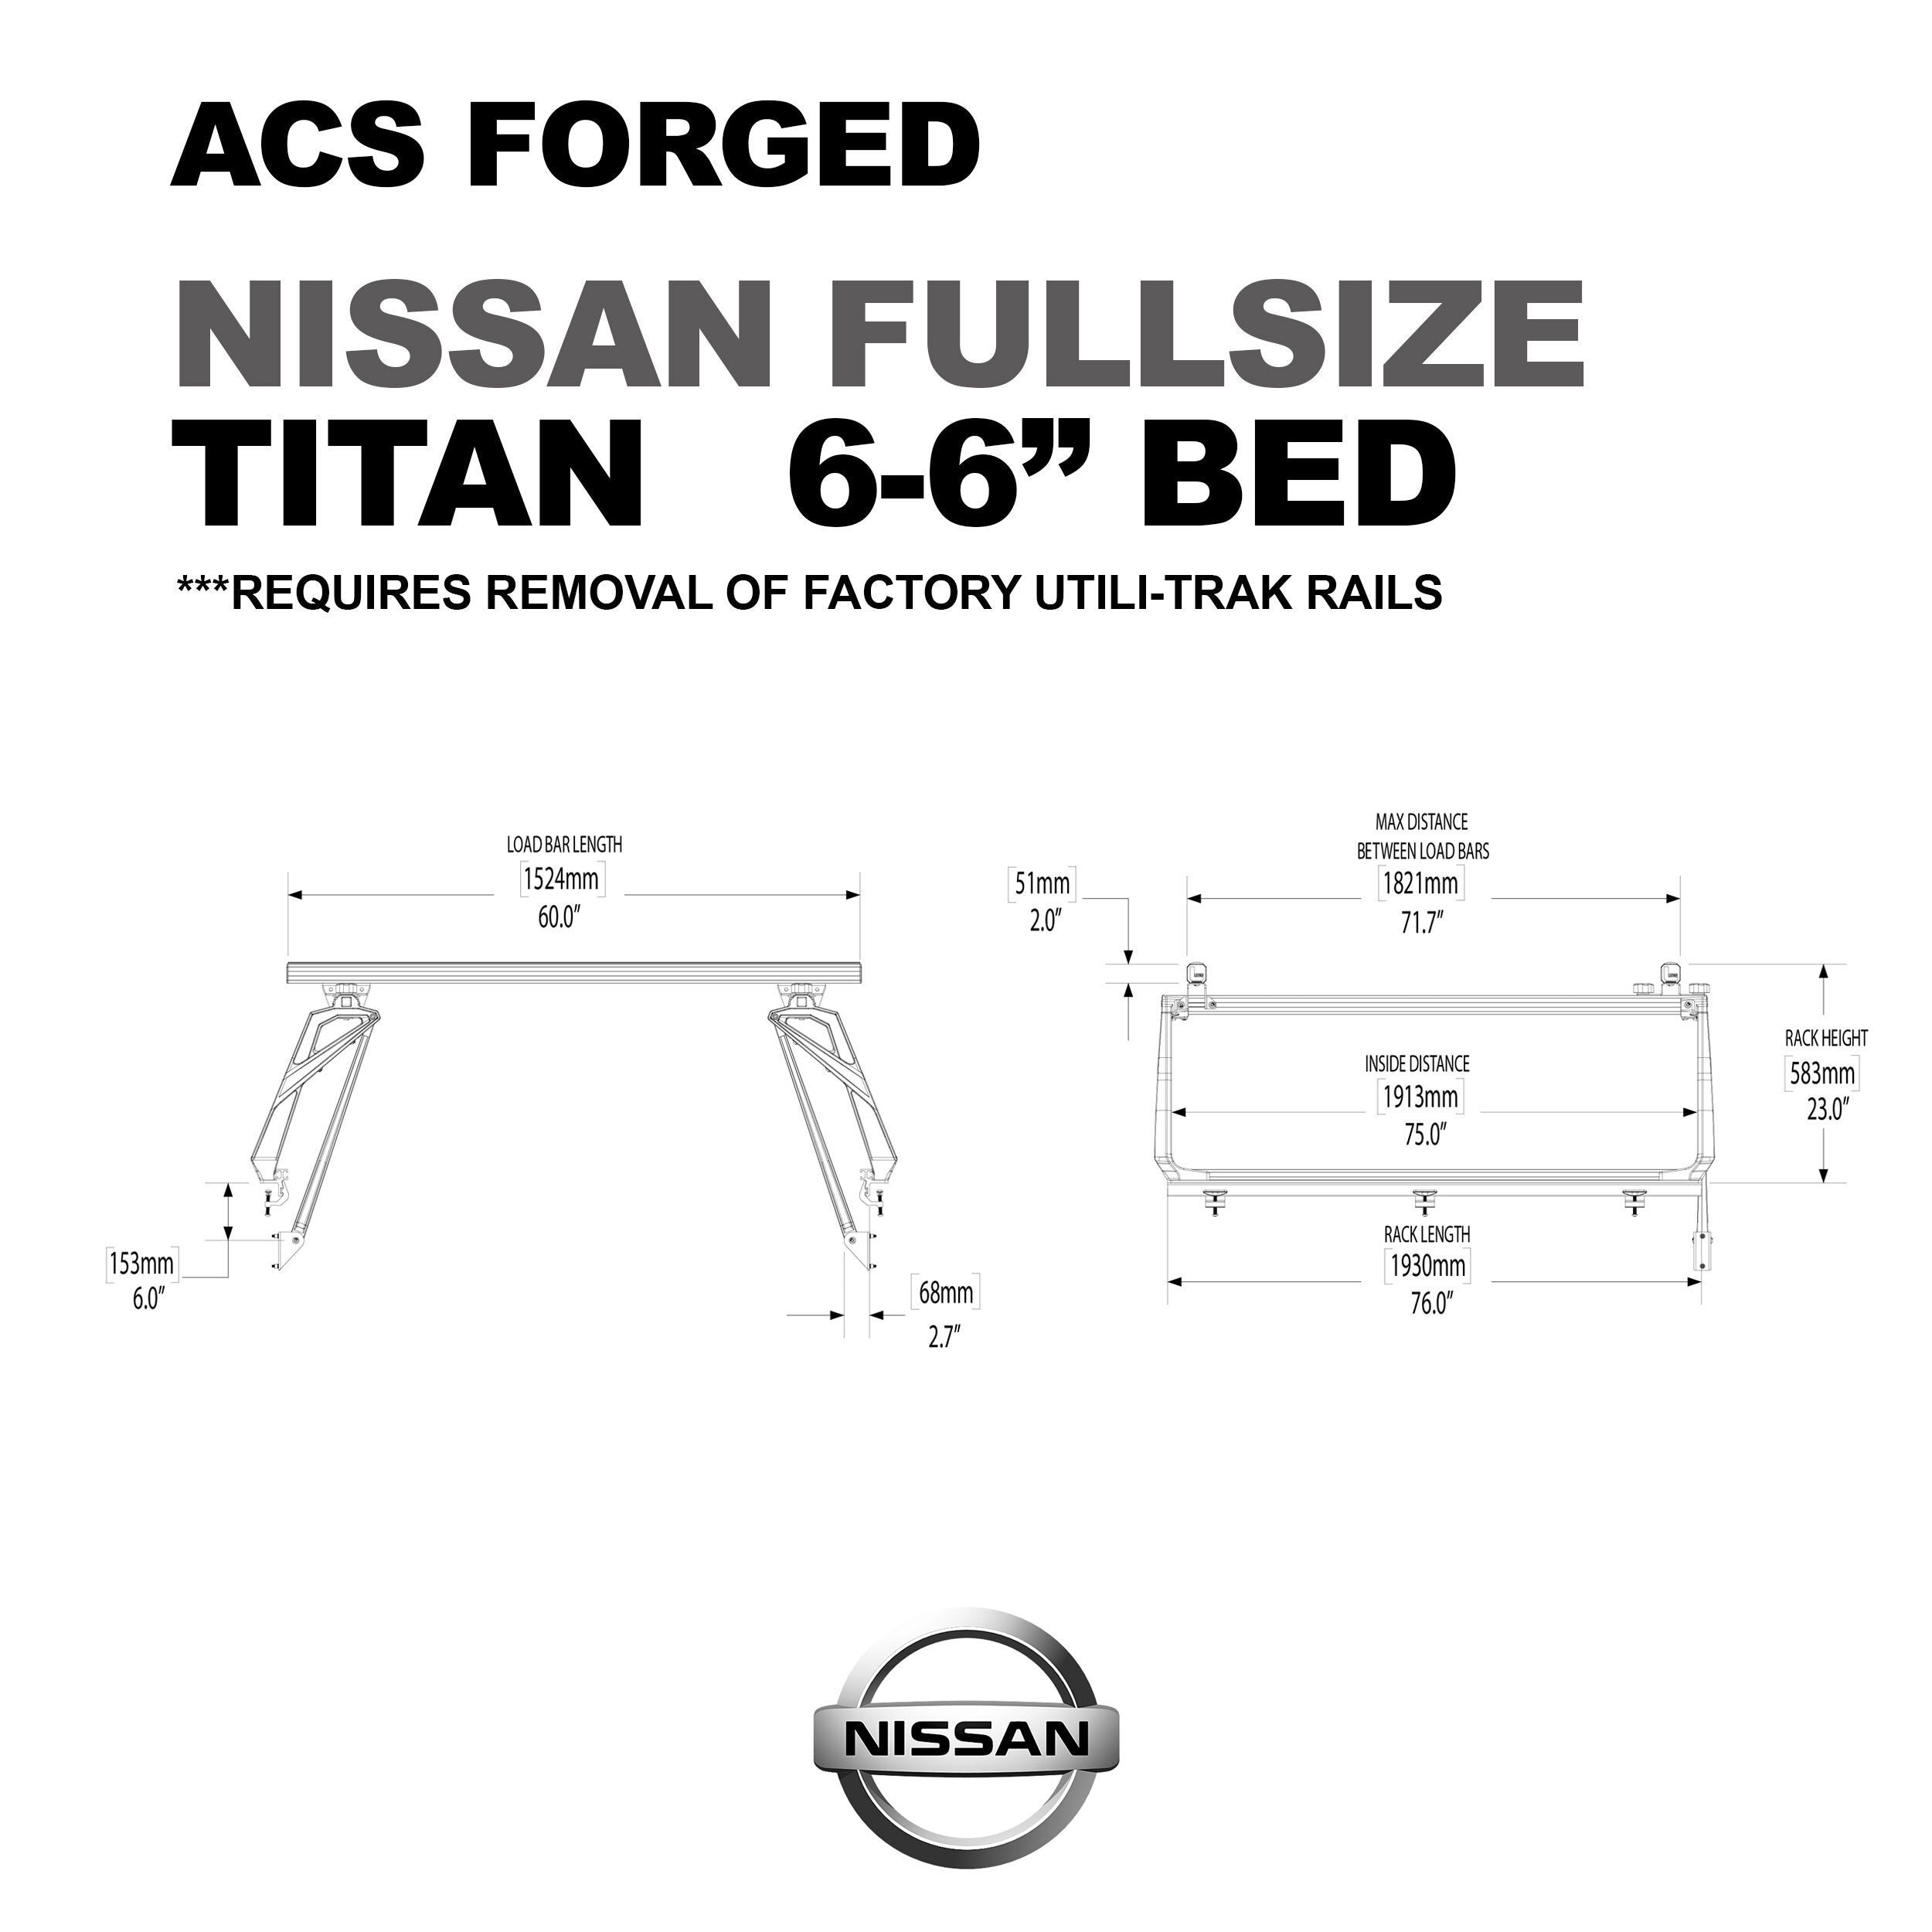 '04-23 Nissan Titan-ACS Forged Bed Accessories Leitner Designs design